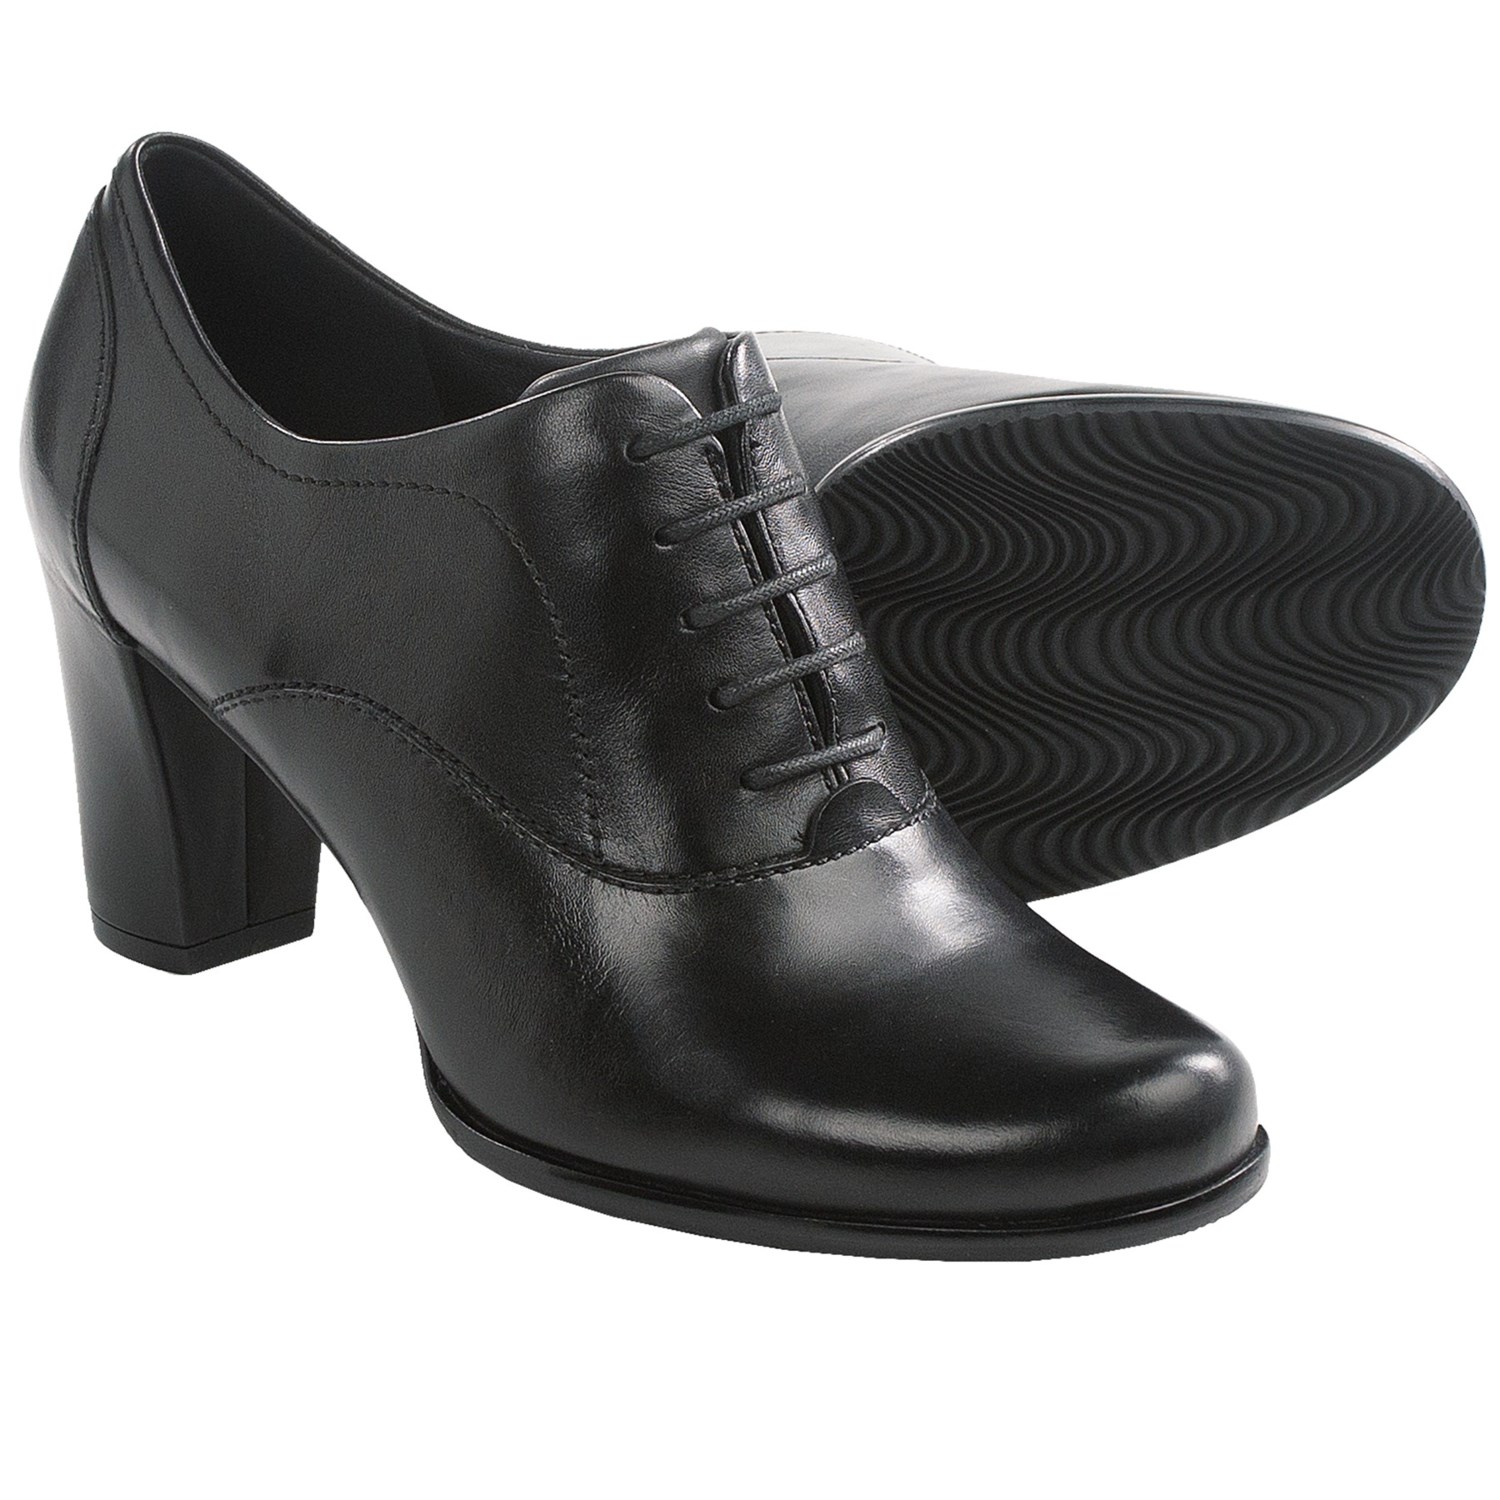 most comfortable women's shoes for retail work